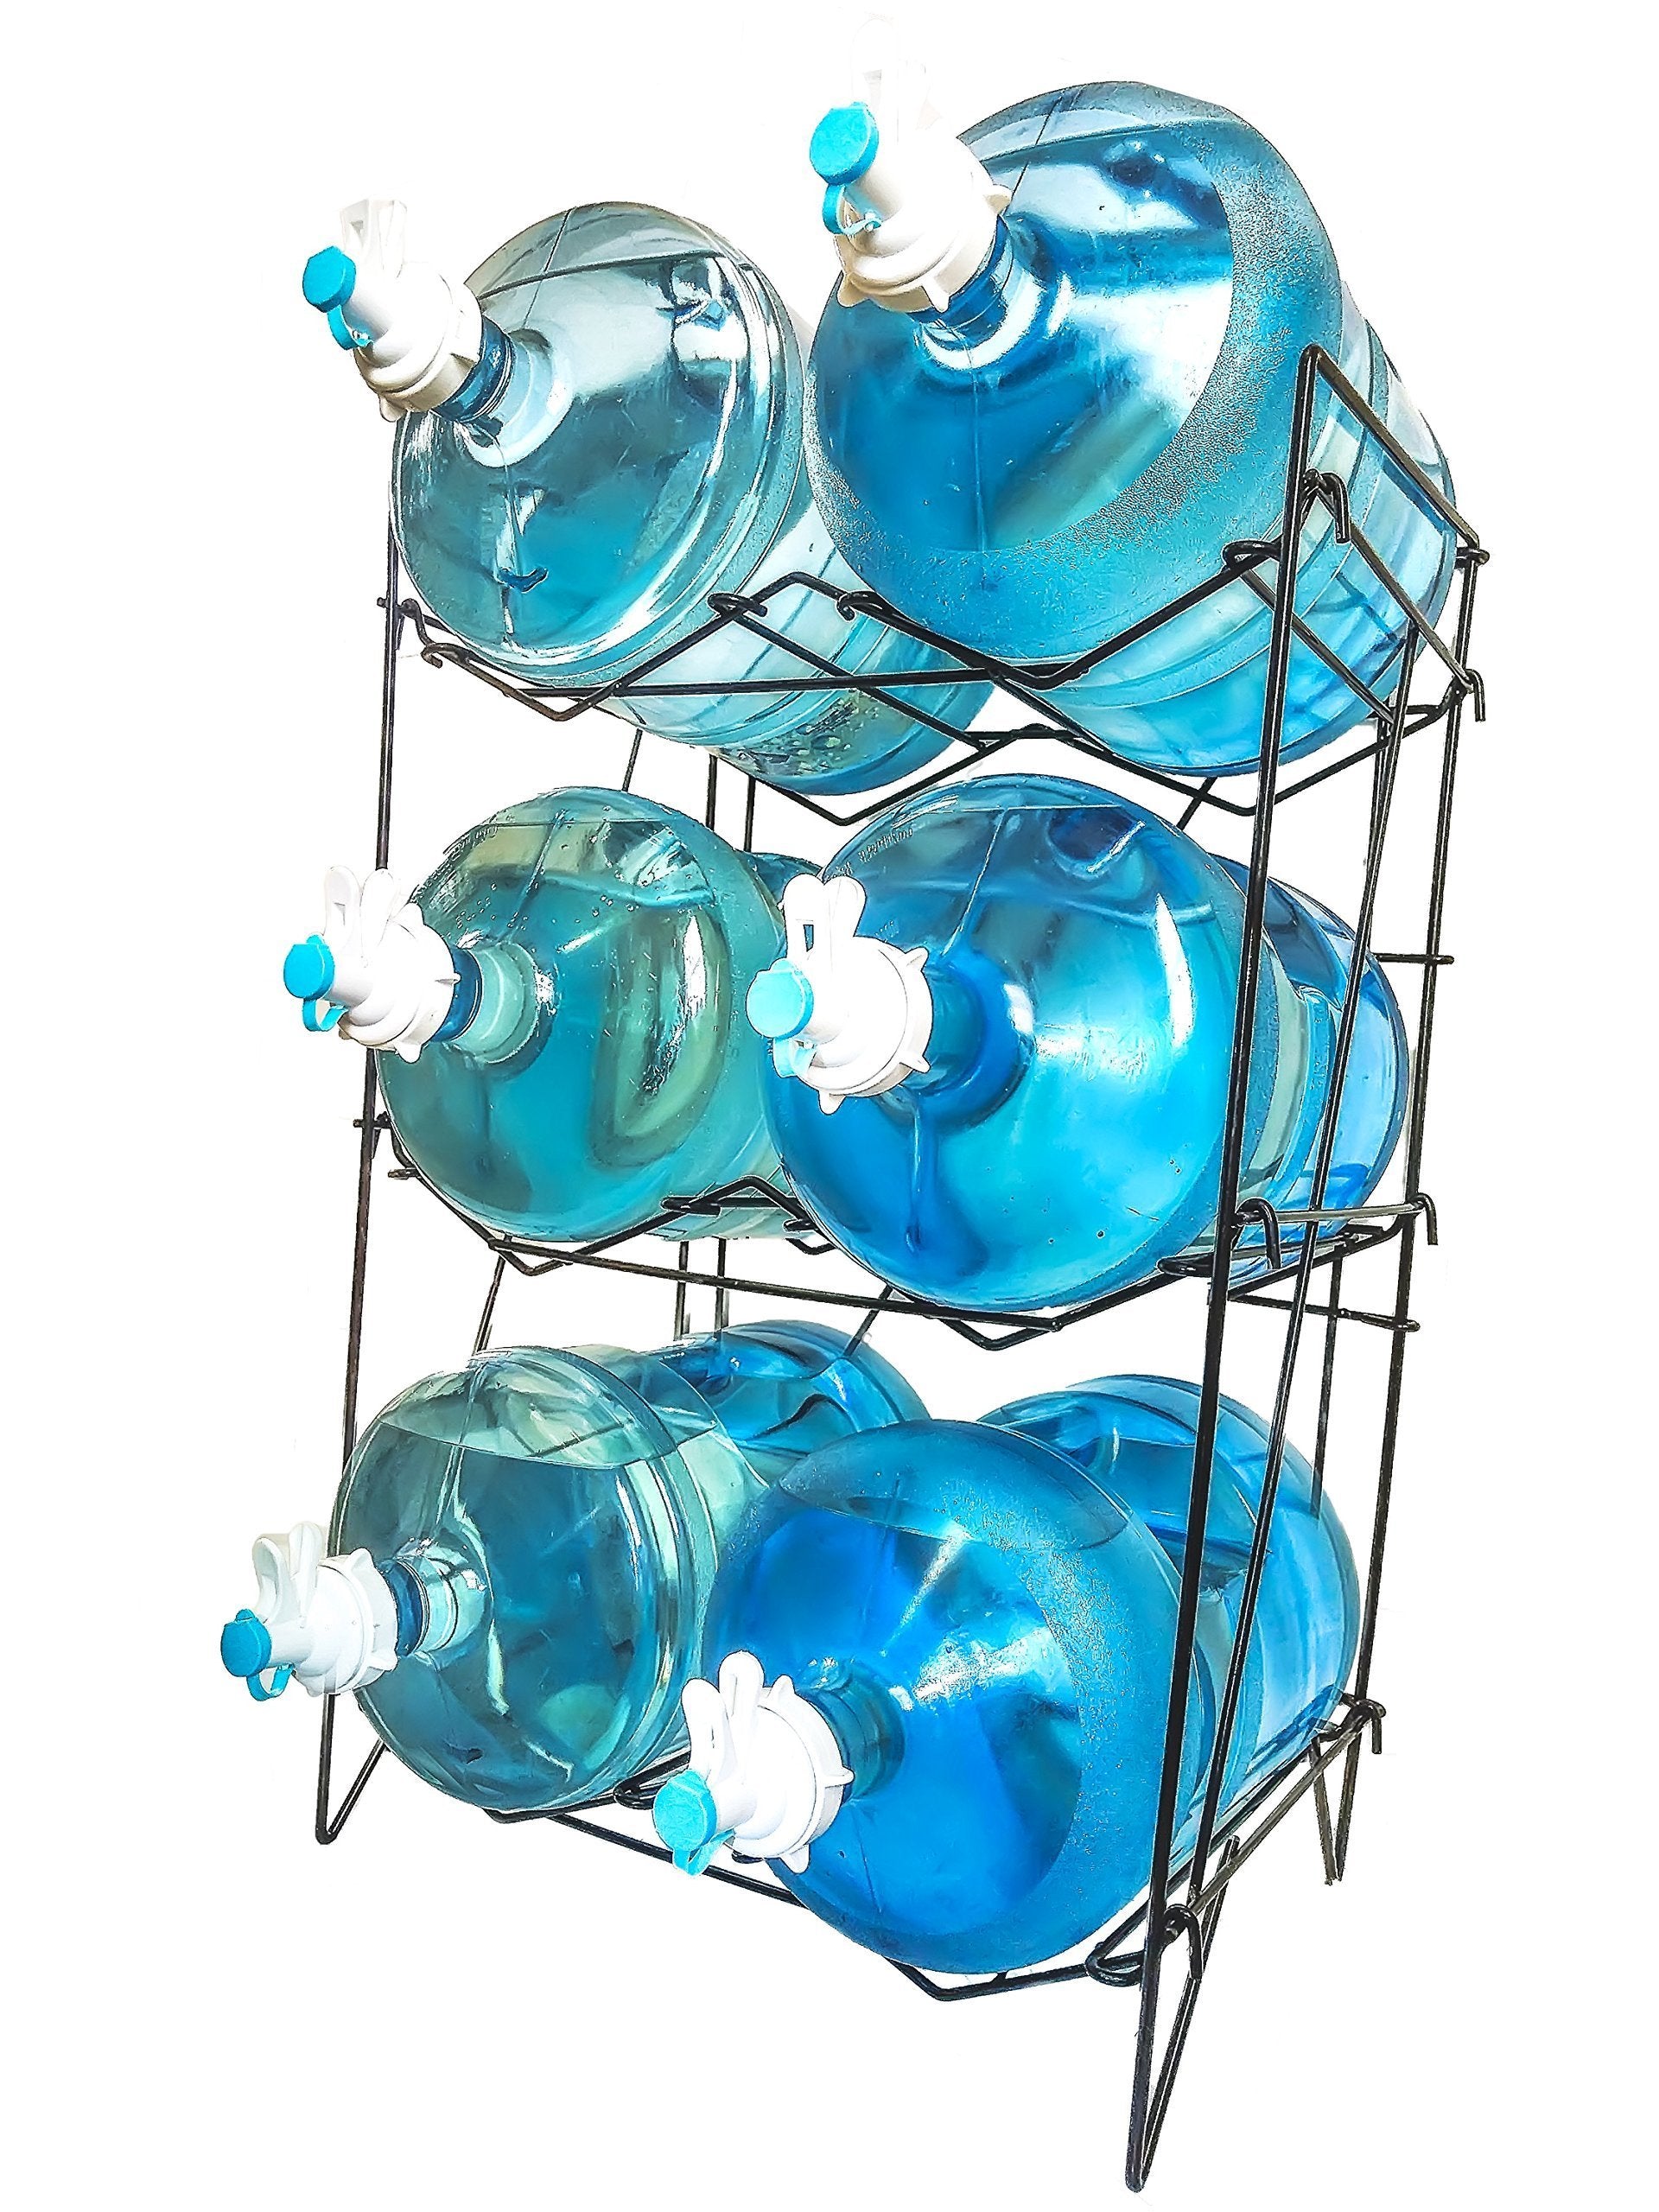 Discover the 3 to 5 gallon water bottle jug shelf rack holder stand kitchen storage instant set up stainless steel heavy duty collapsible sturdy durable portable fits anywhere only 11 lbs holds 400 lbs